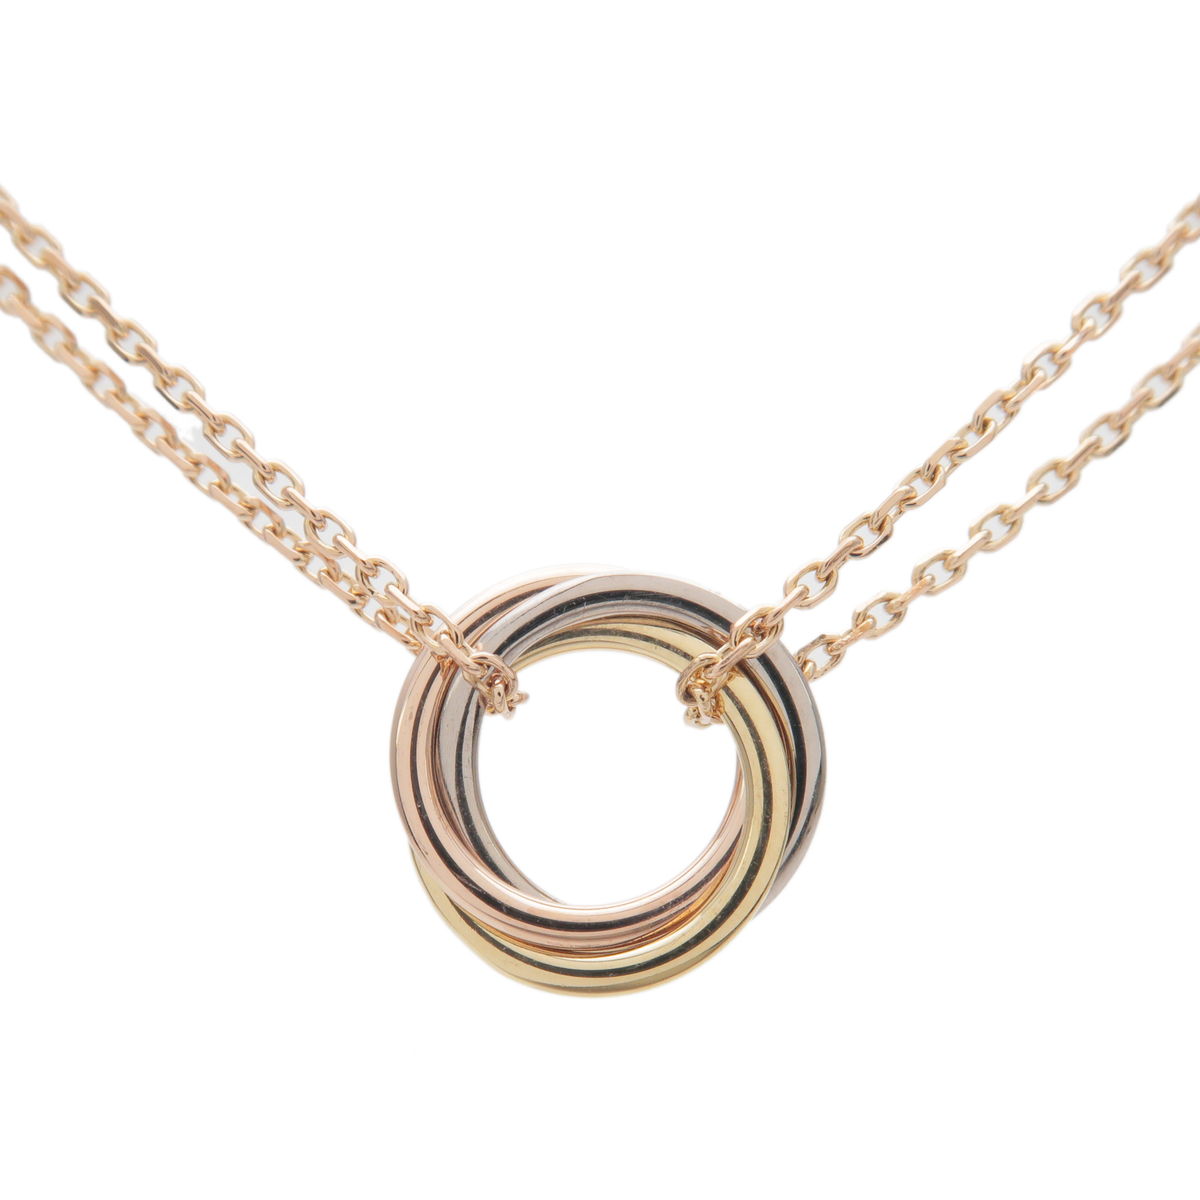 Cartier-Sweet-Trinity-Necklace-K18-750-Yellow/White/Rose-Gold